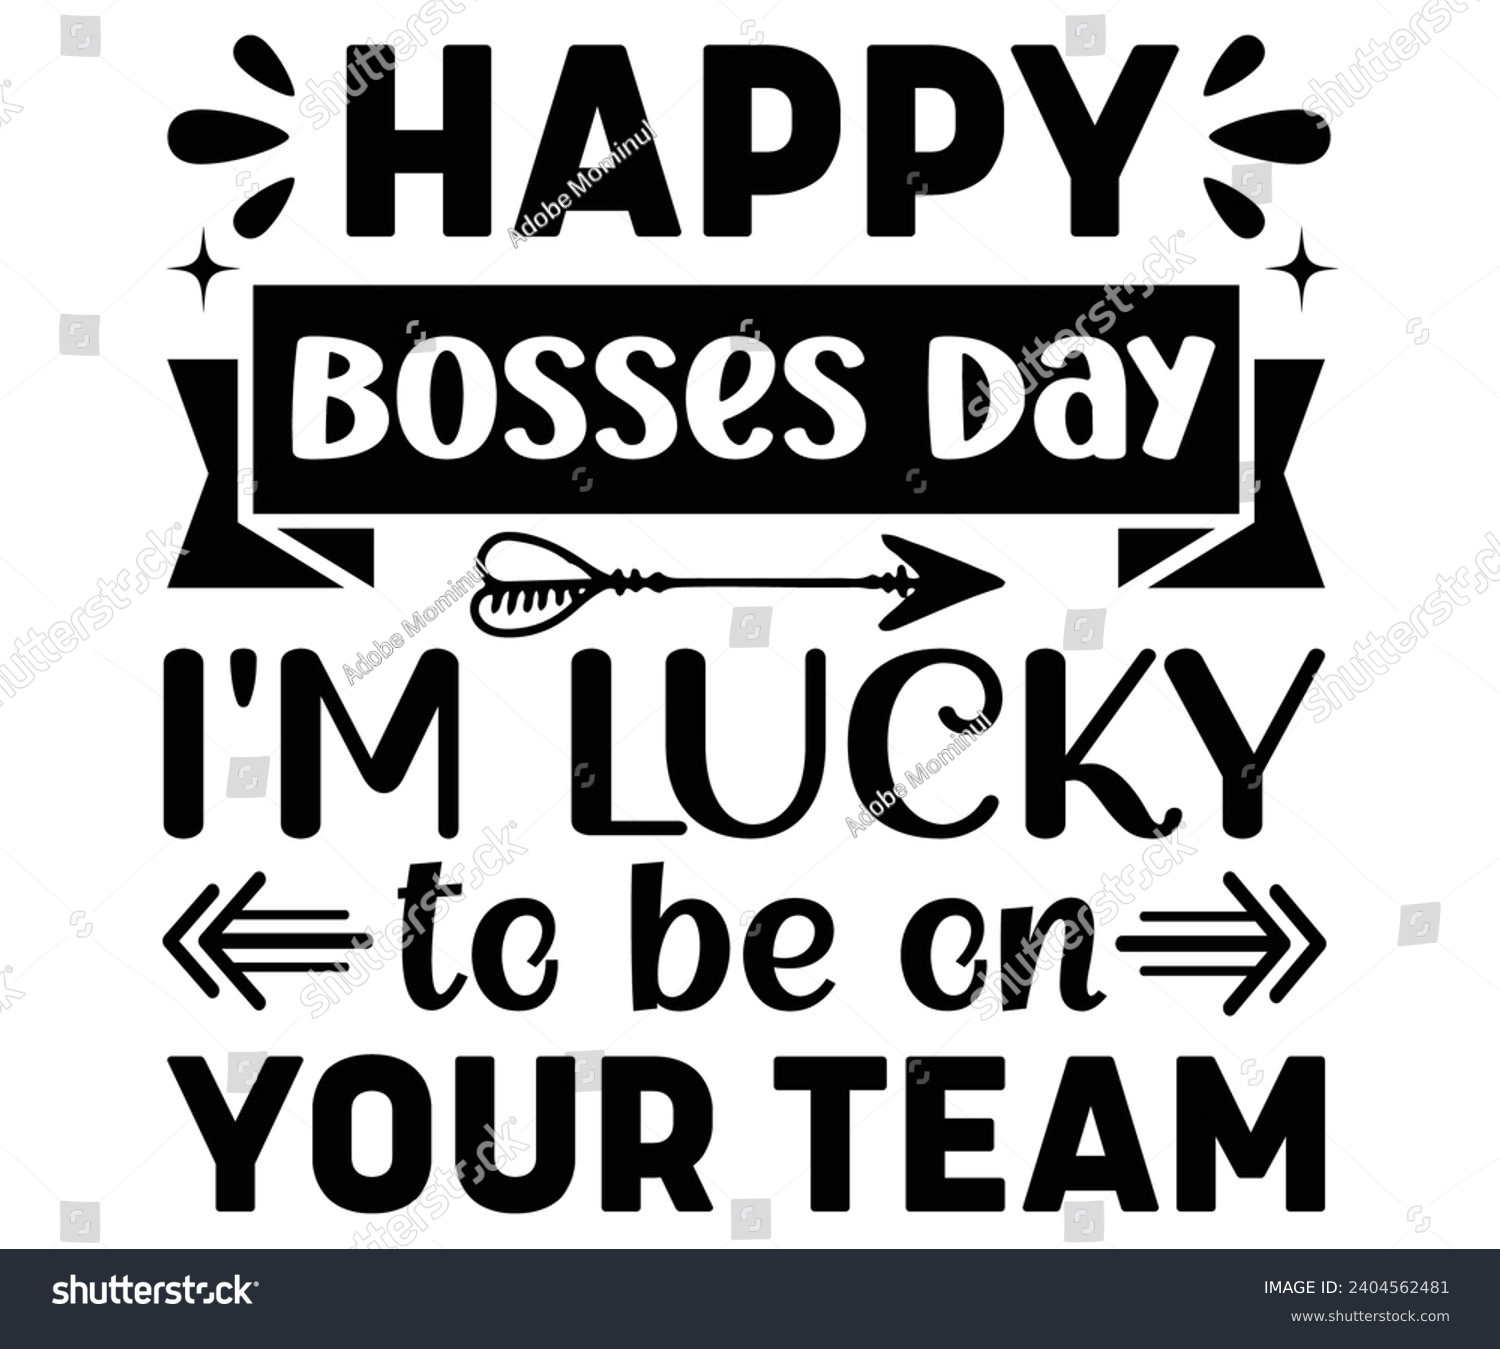 SVG of Happy Bosses Day I'm Lucky to Be on Your Team Svg,Happy Boss Day svg,Boss Saying Quotes,Boss Day T-shirt,Gift for Boss,Great Jobs,Happy Bosses Day t-shirt,Girl Boss Shirt,Motivational Boss,Cut File, svg